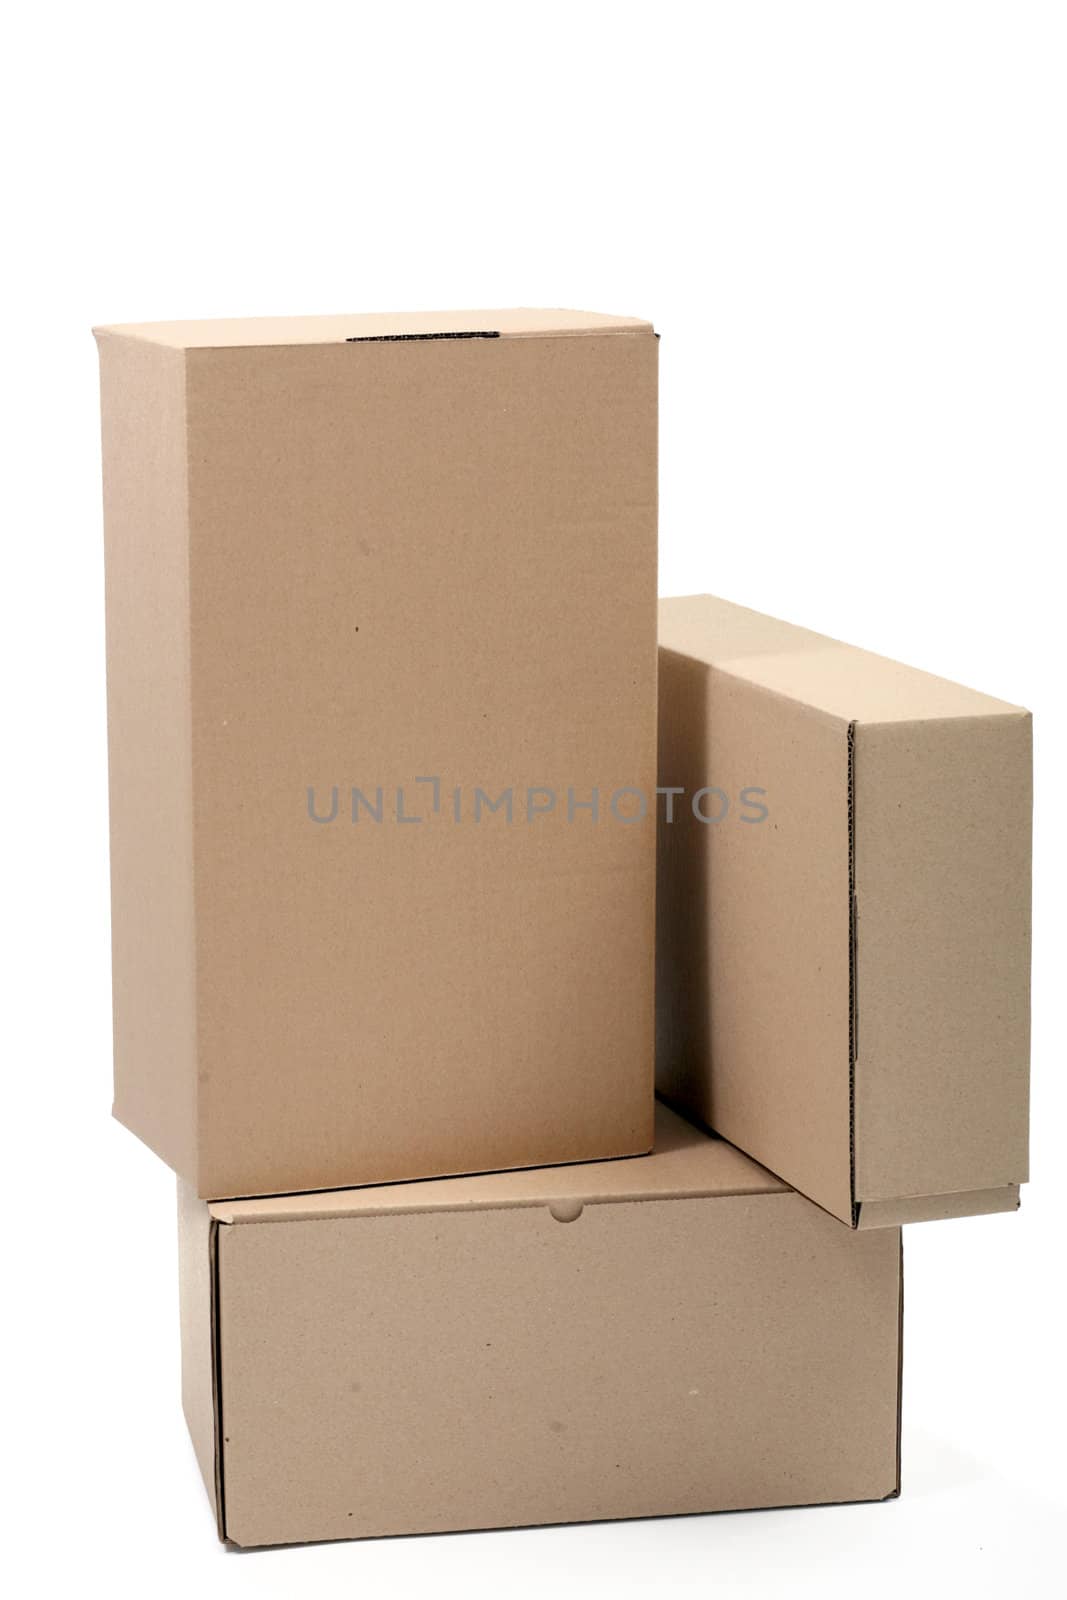 An image of three brown cardboard boxes 